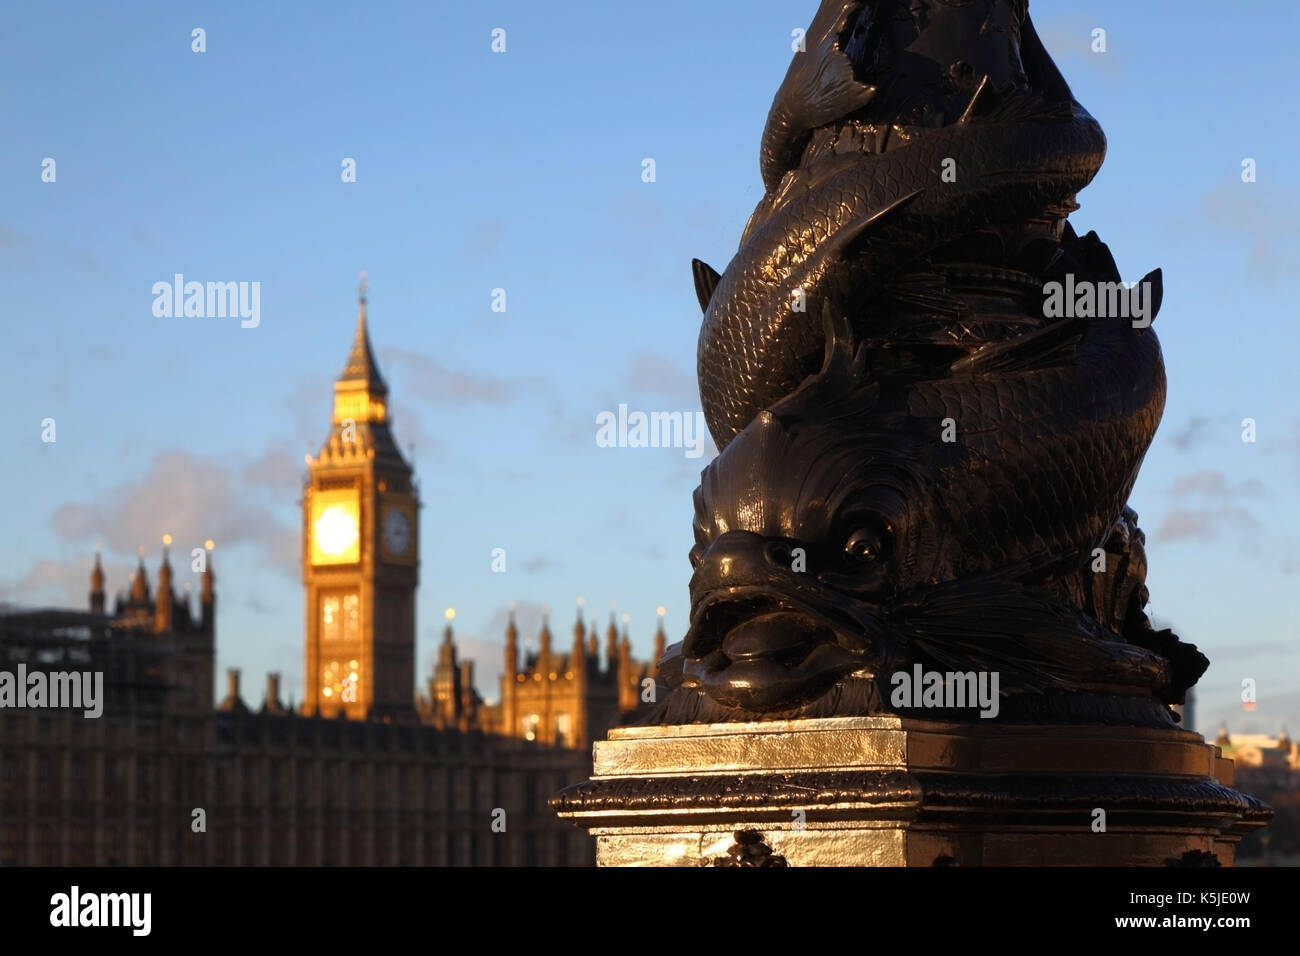 Vulliamy dolphin lamp on Albert Embankment , Big Ben and Palace of Westminster in background, London, England Stock Photo